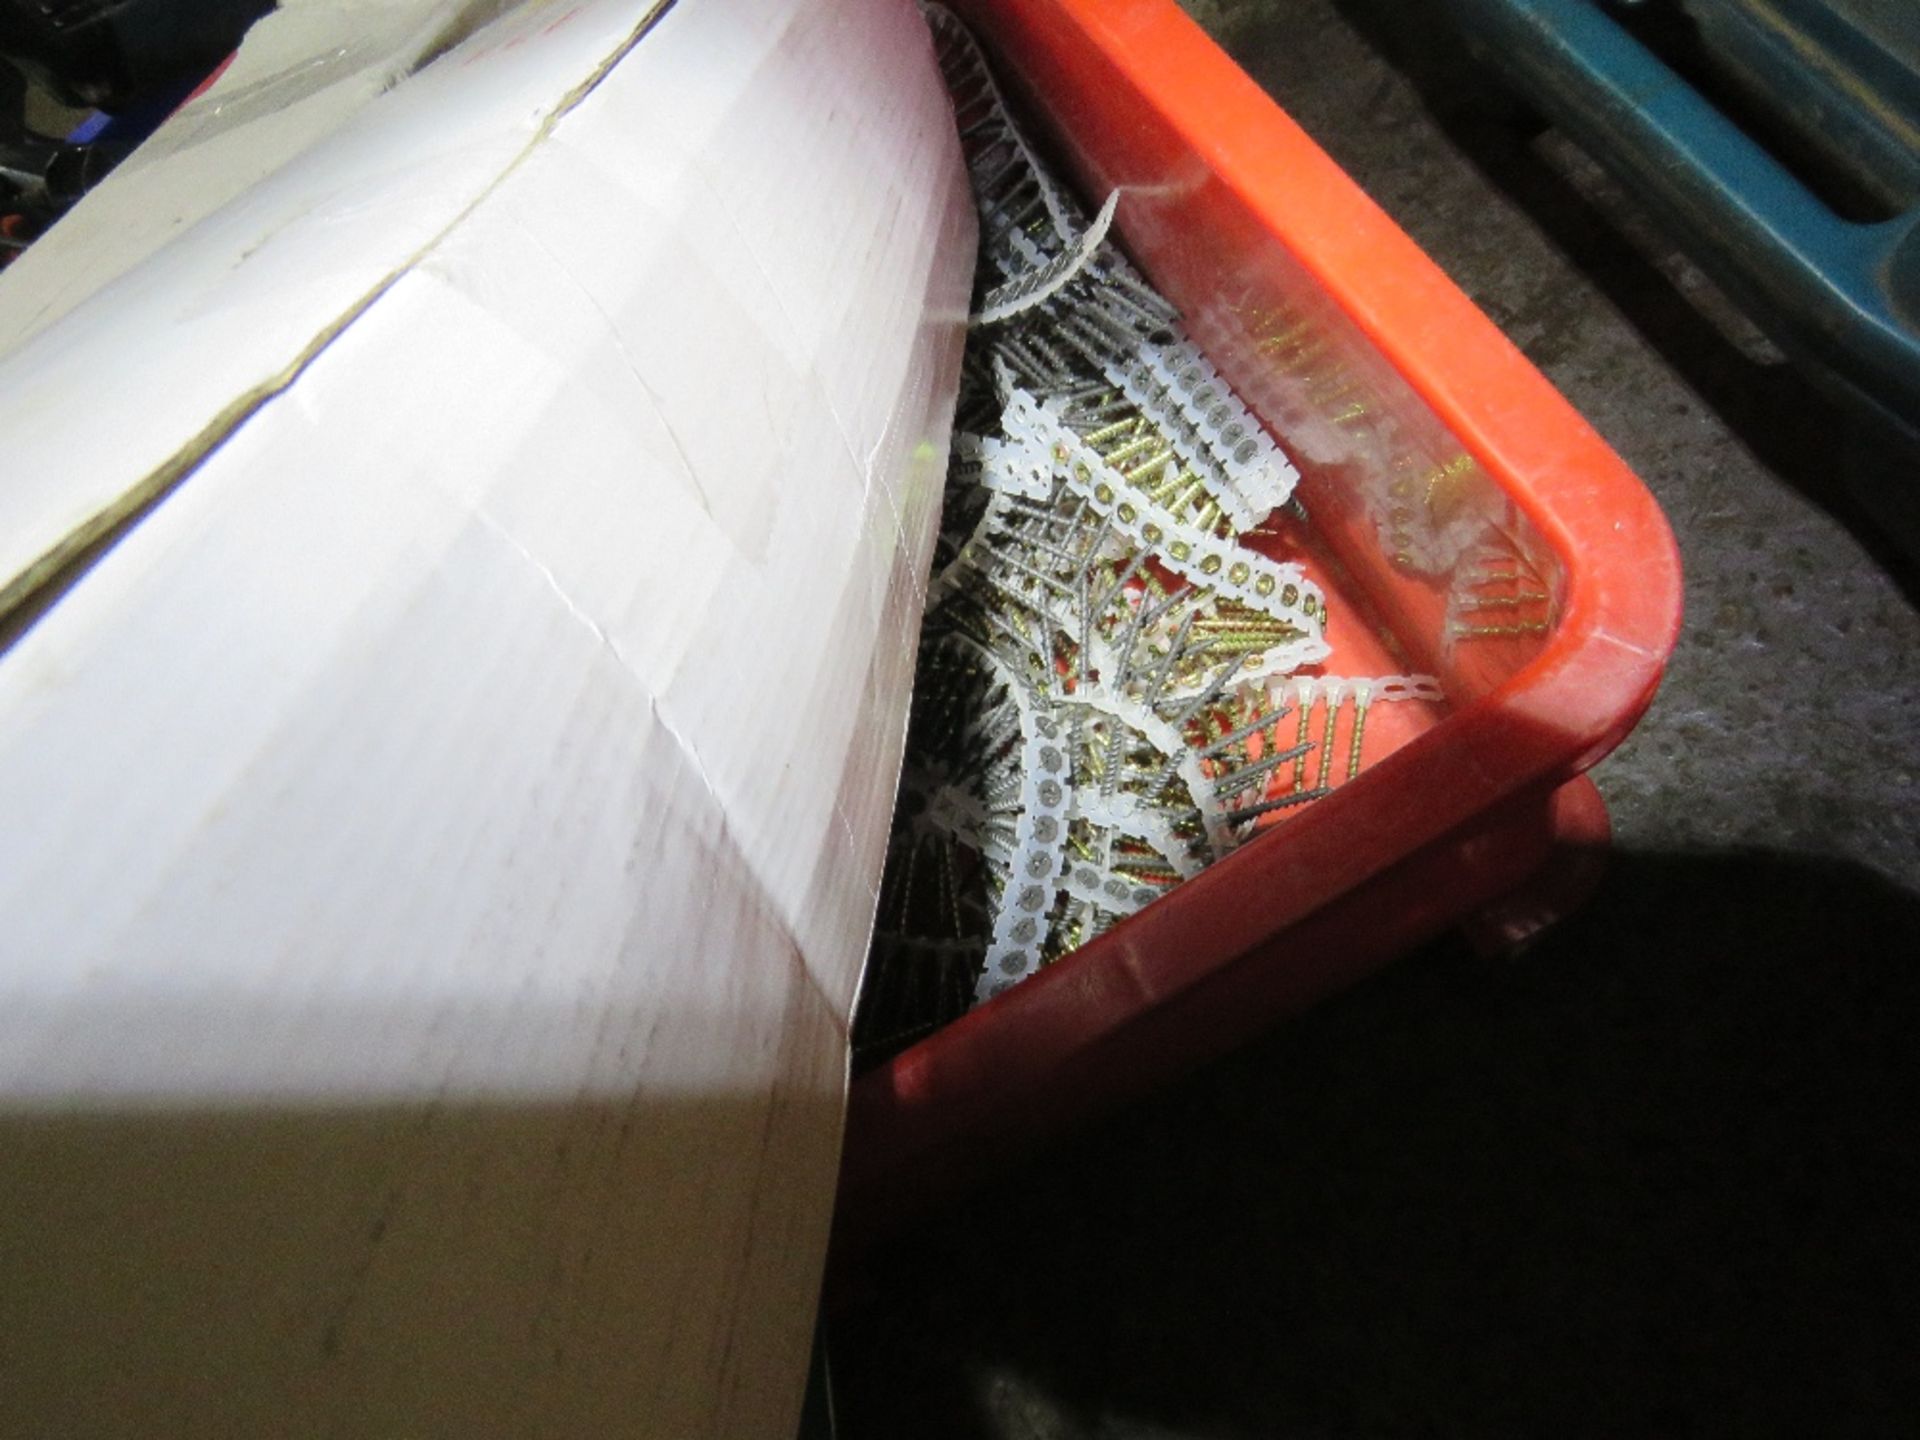 BOX OF COLLATED SCREWS. - Image 3 of 3